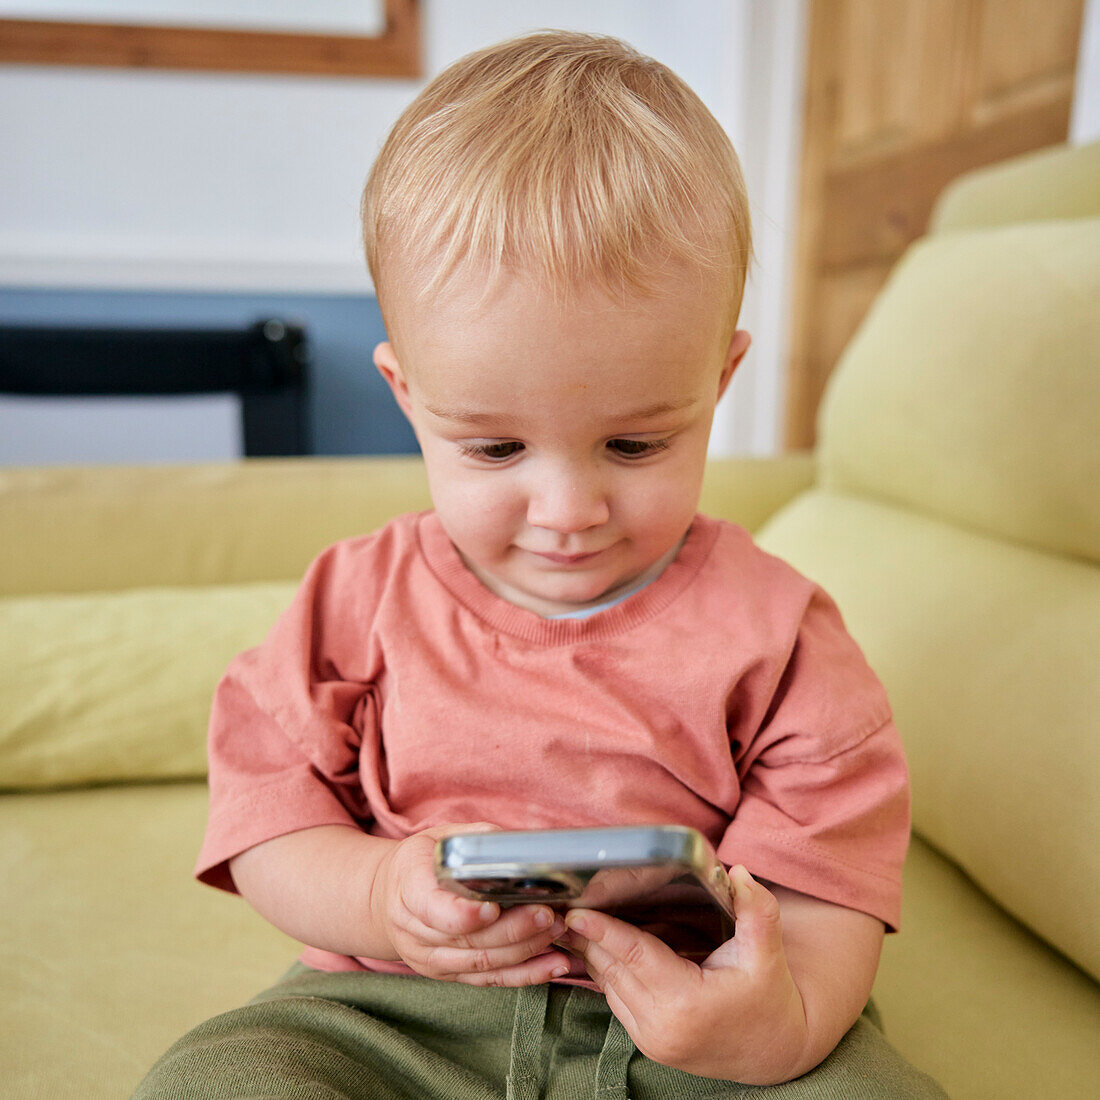 Toddler holding smart phone with animated expression indoors